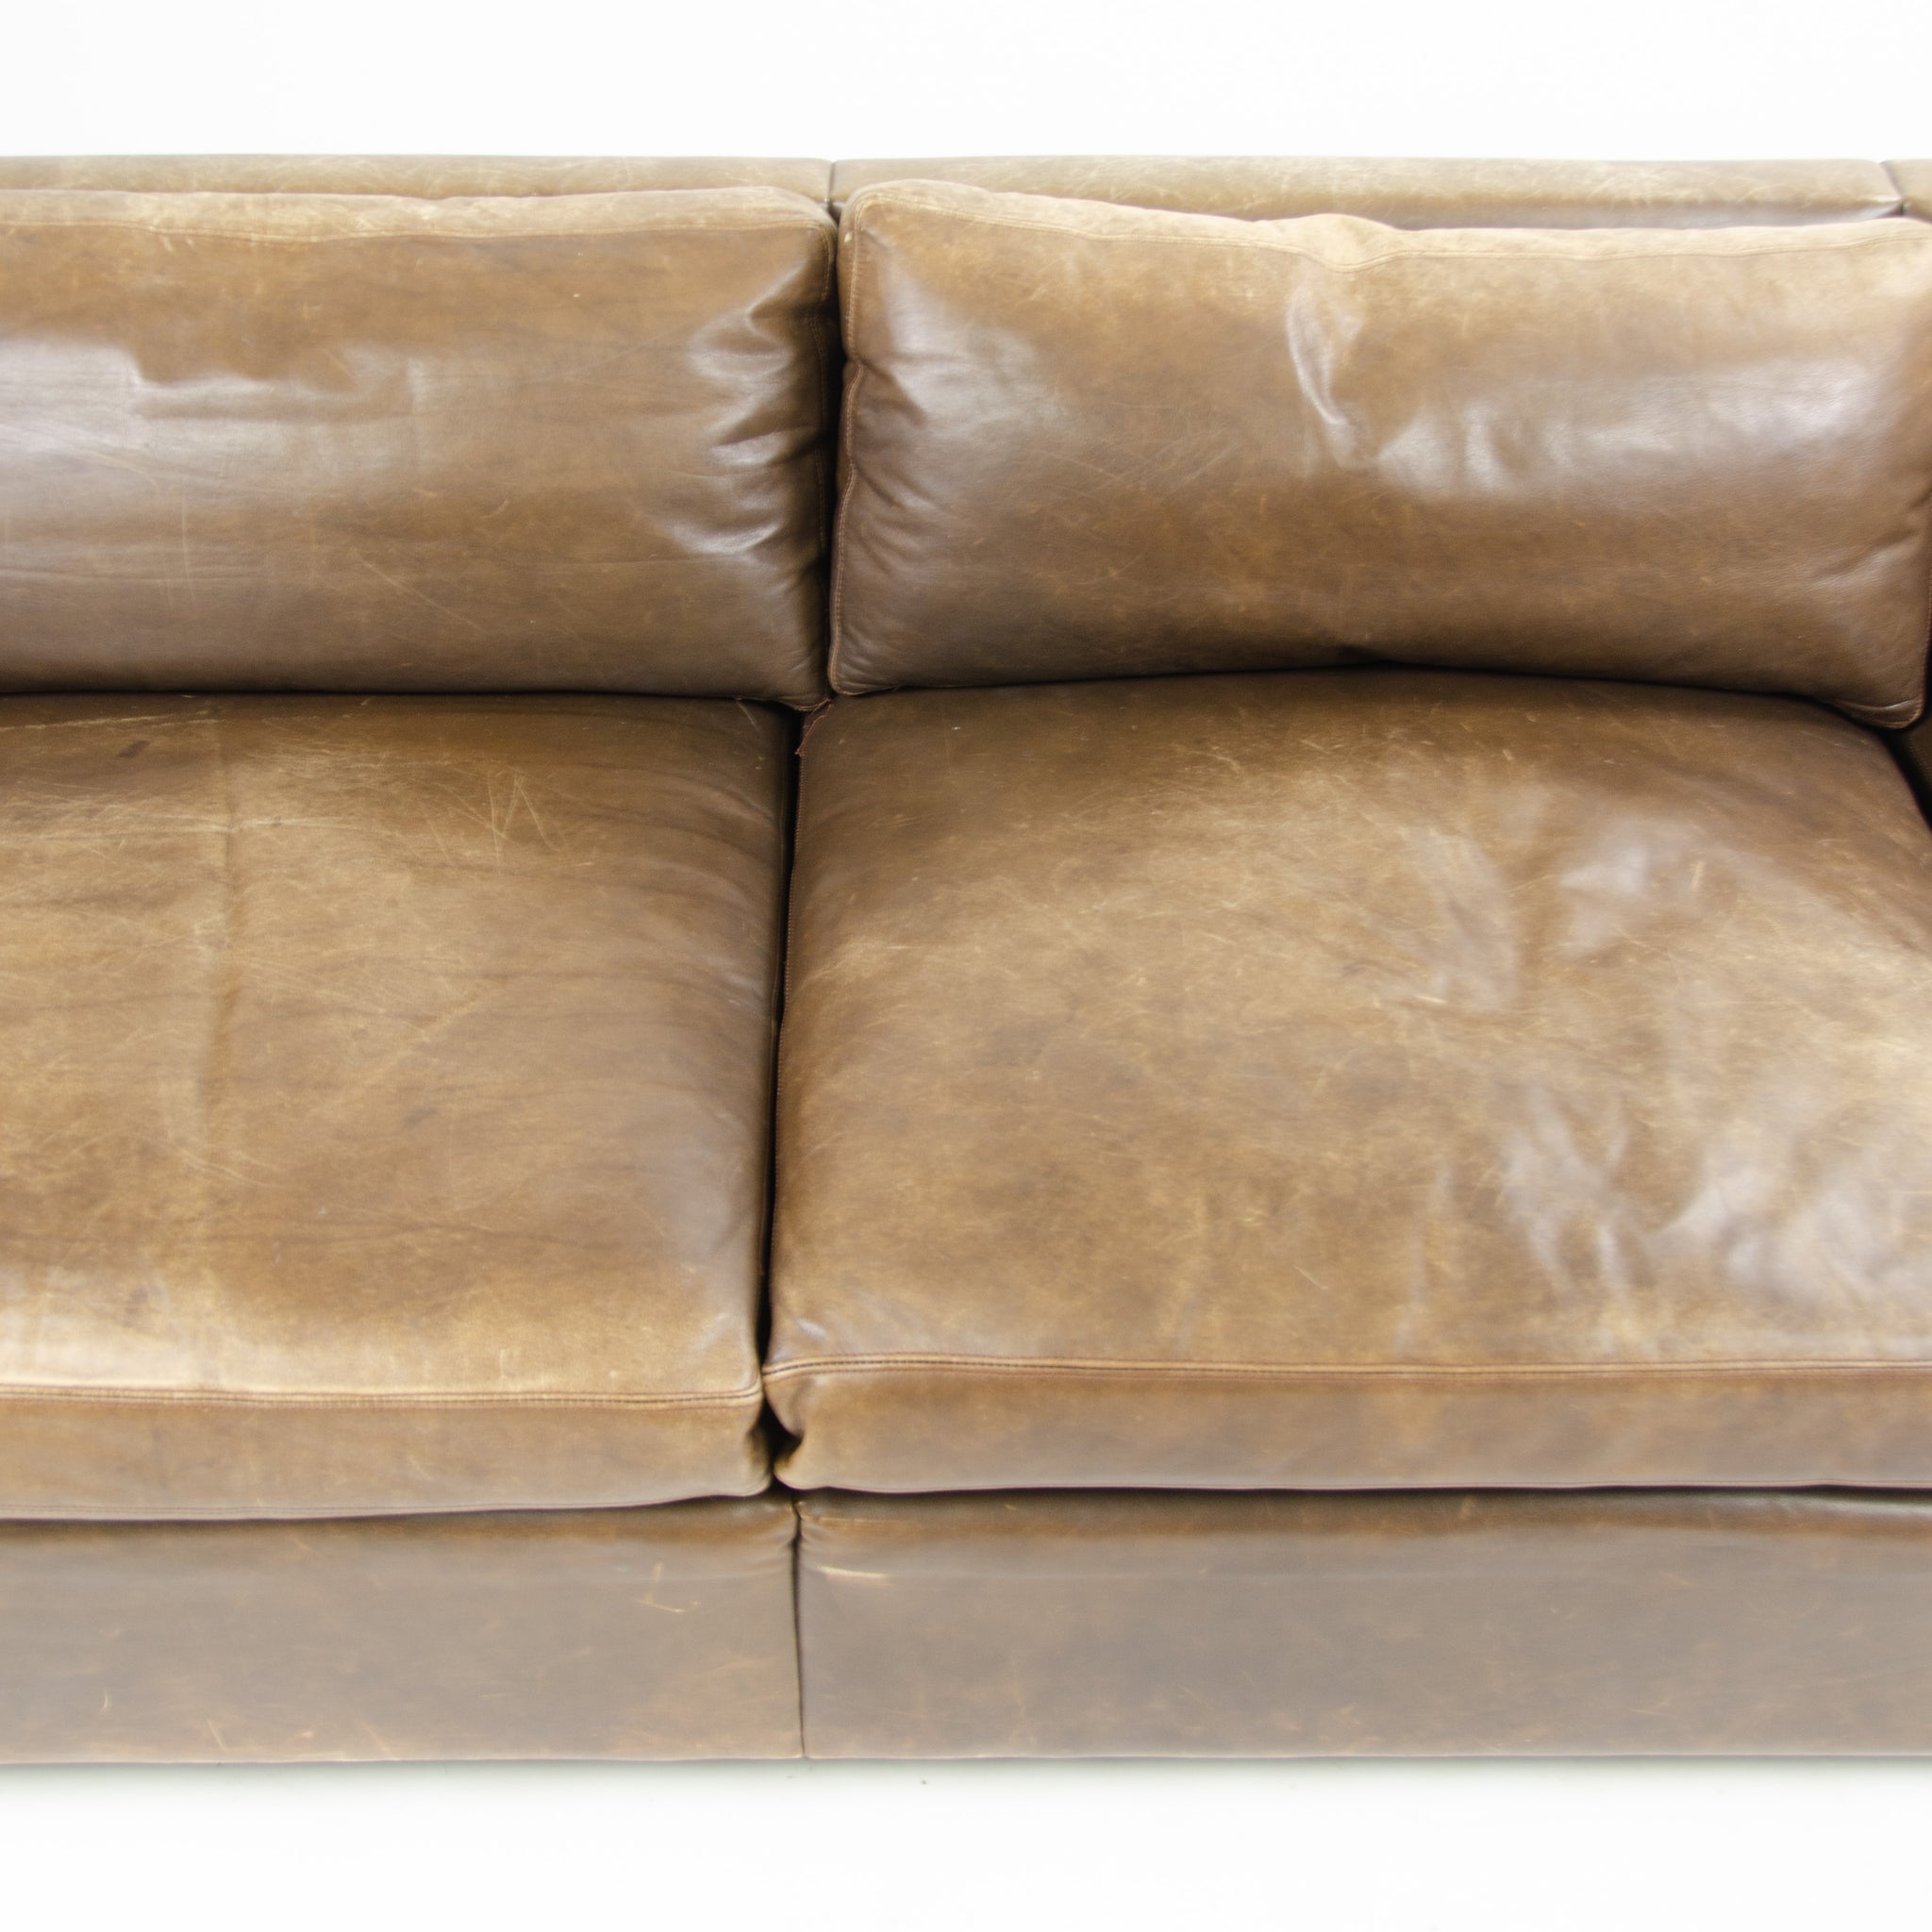 SOLD 1978 Knoll Charles Pfister Brown Leather Sofa